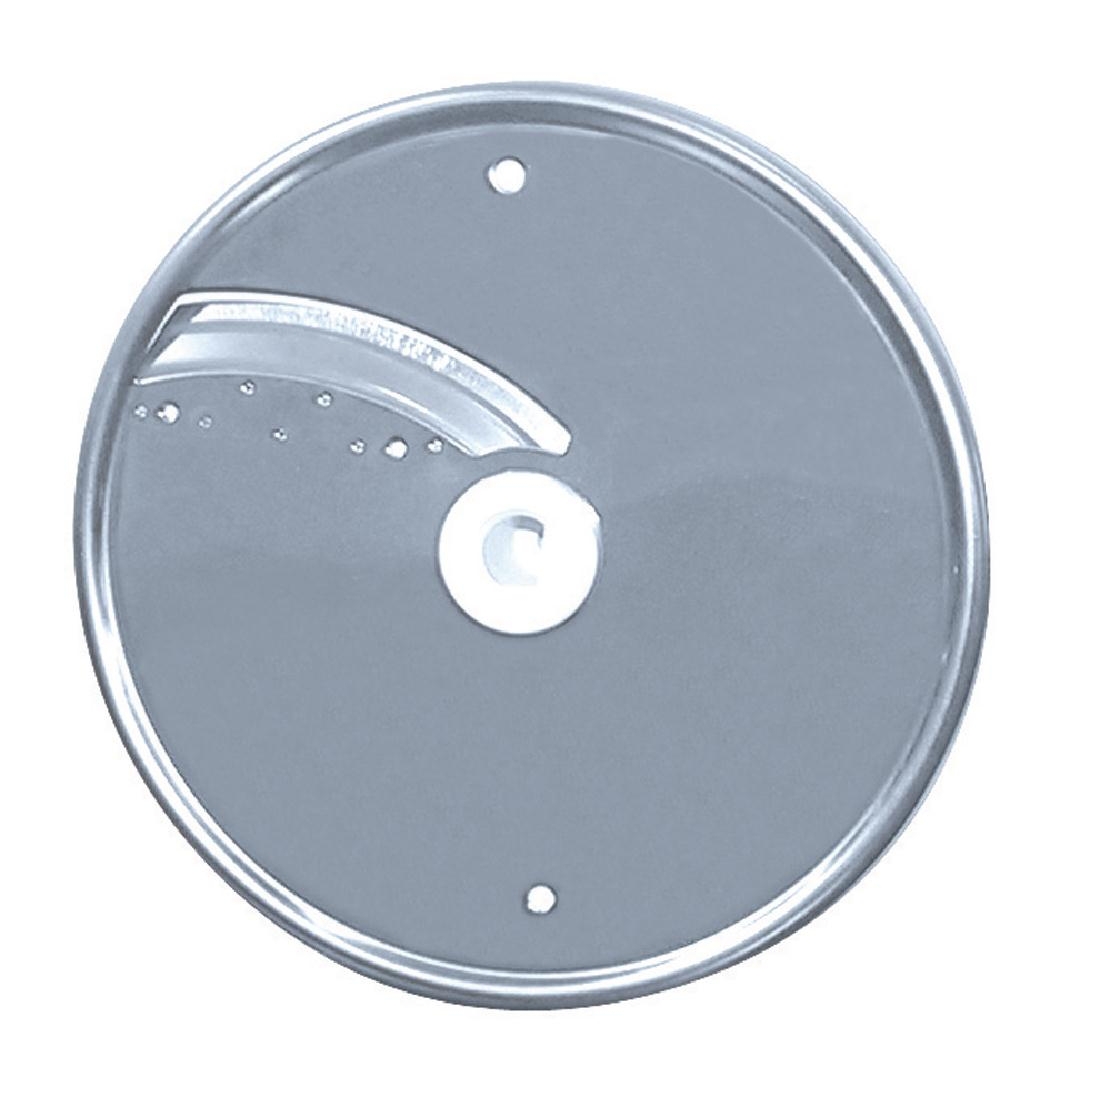 Electrolux 7mm Slicing Disc for 653845+603834